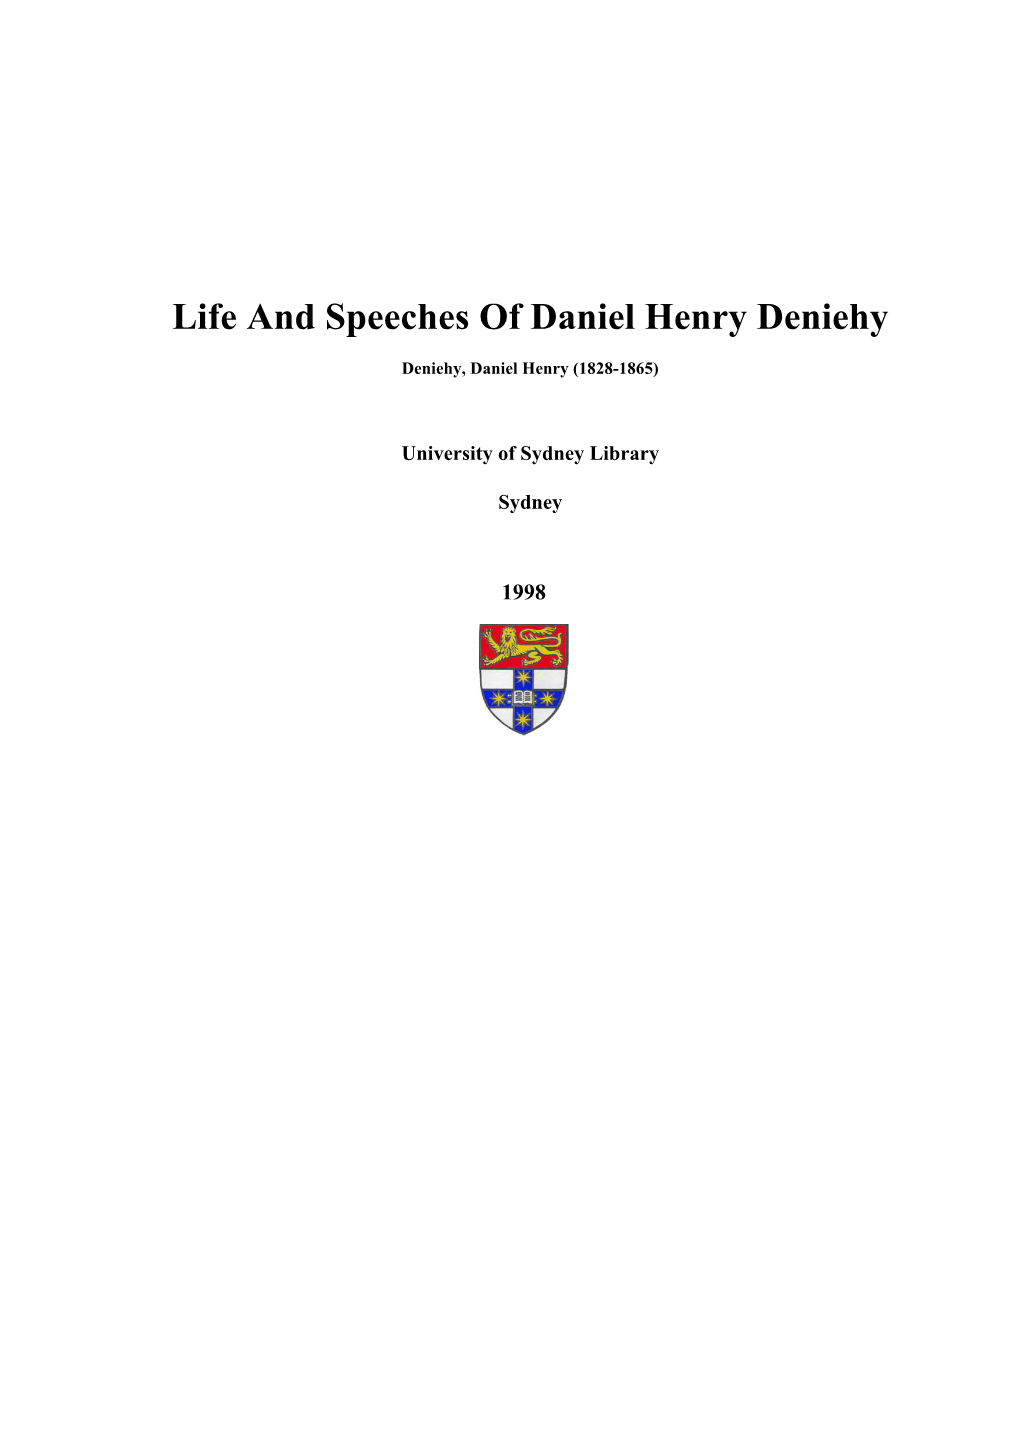 Life and Speeches of Daniel Henry Deniehy